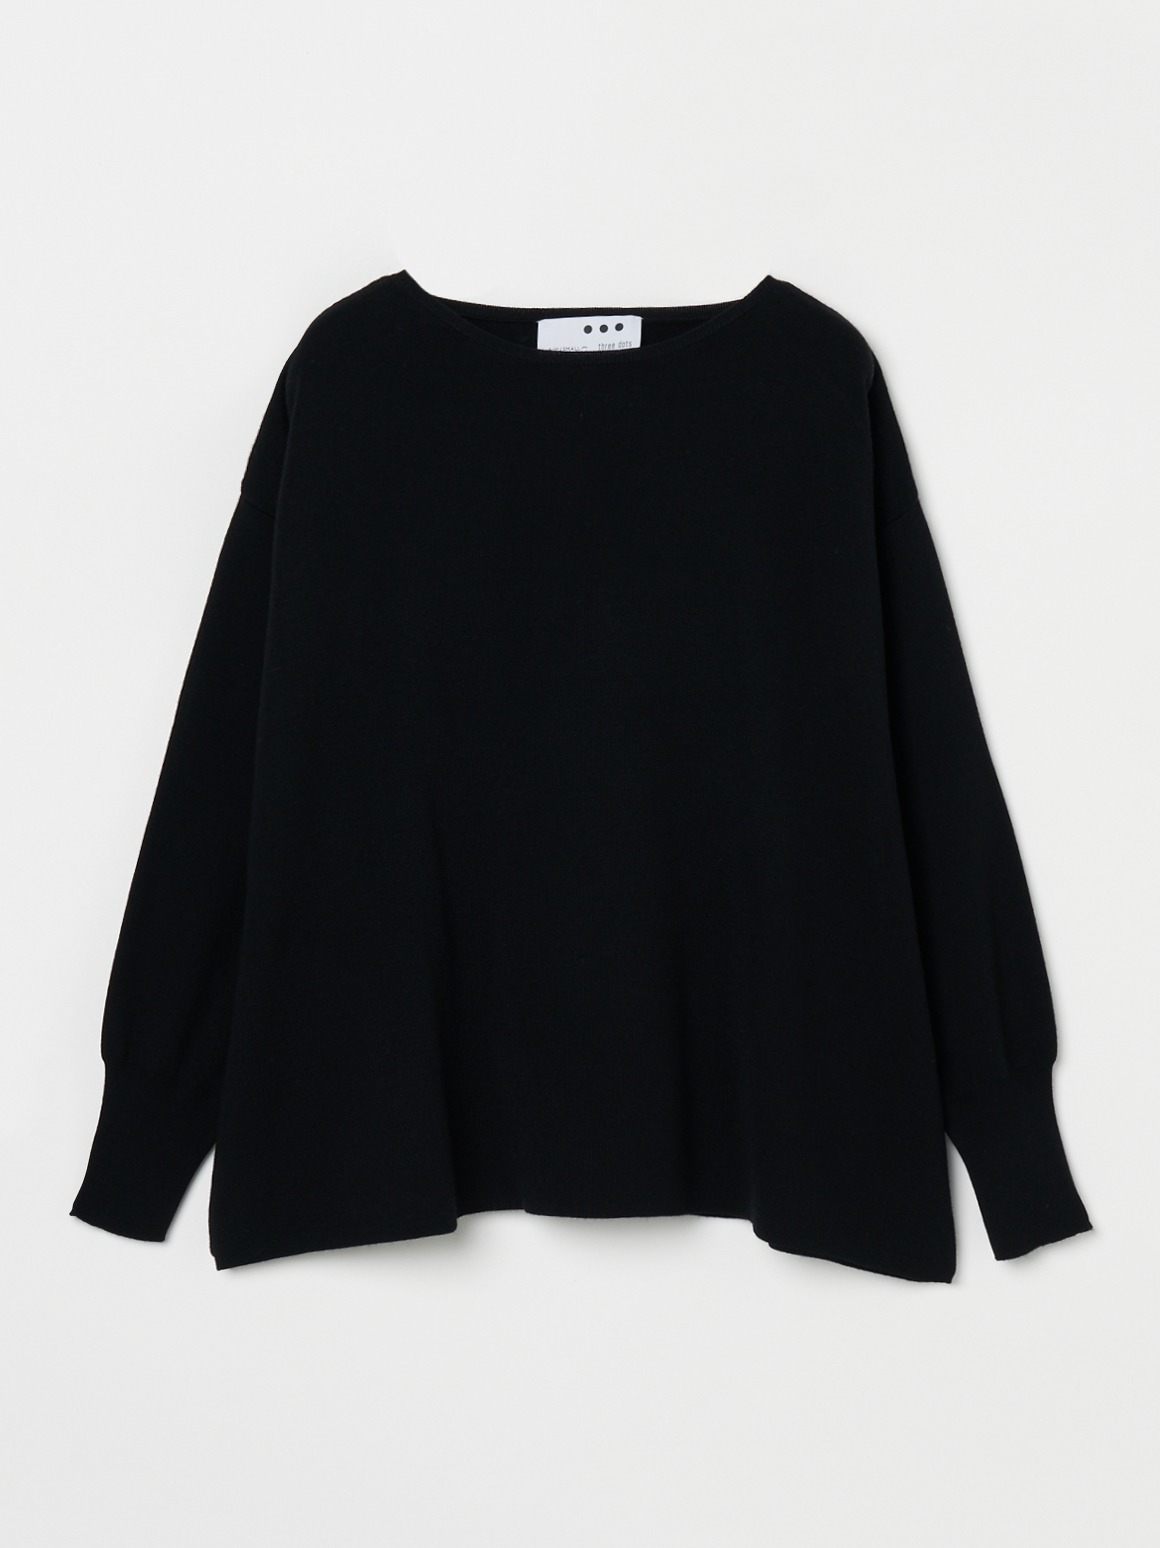 Wool outfit l/s boatneck 詳細画像 black 2